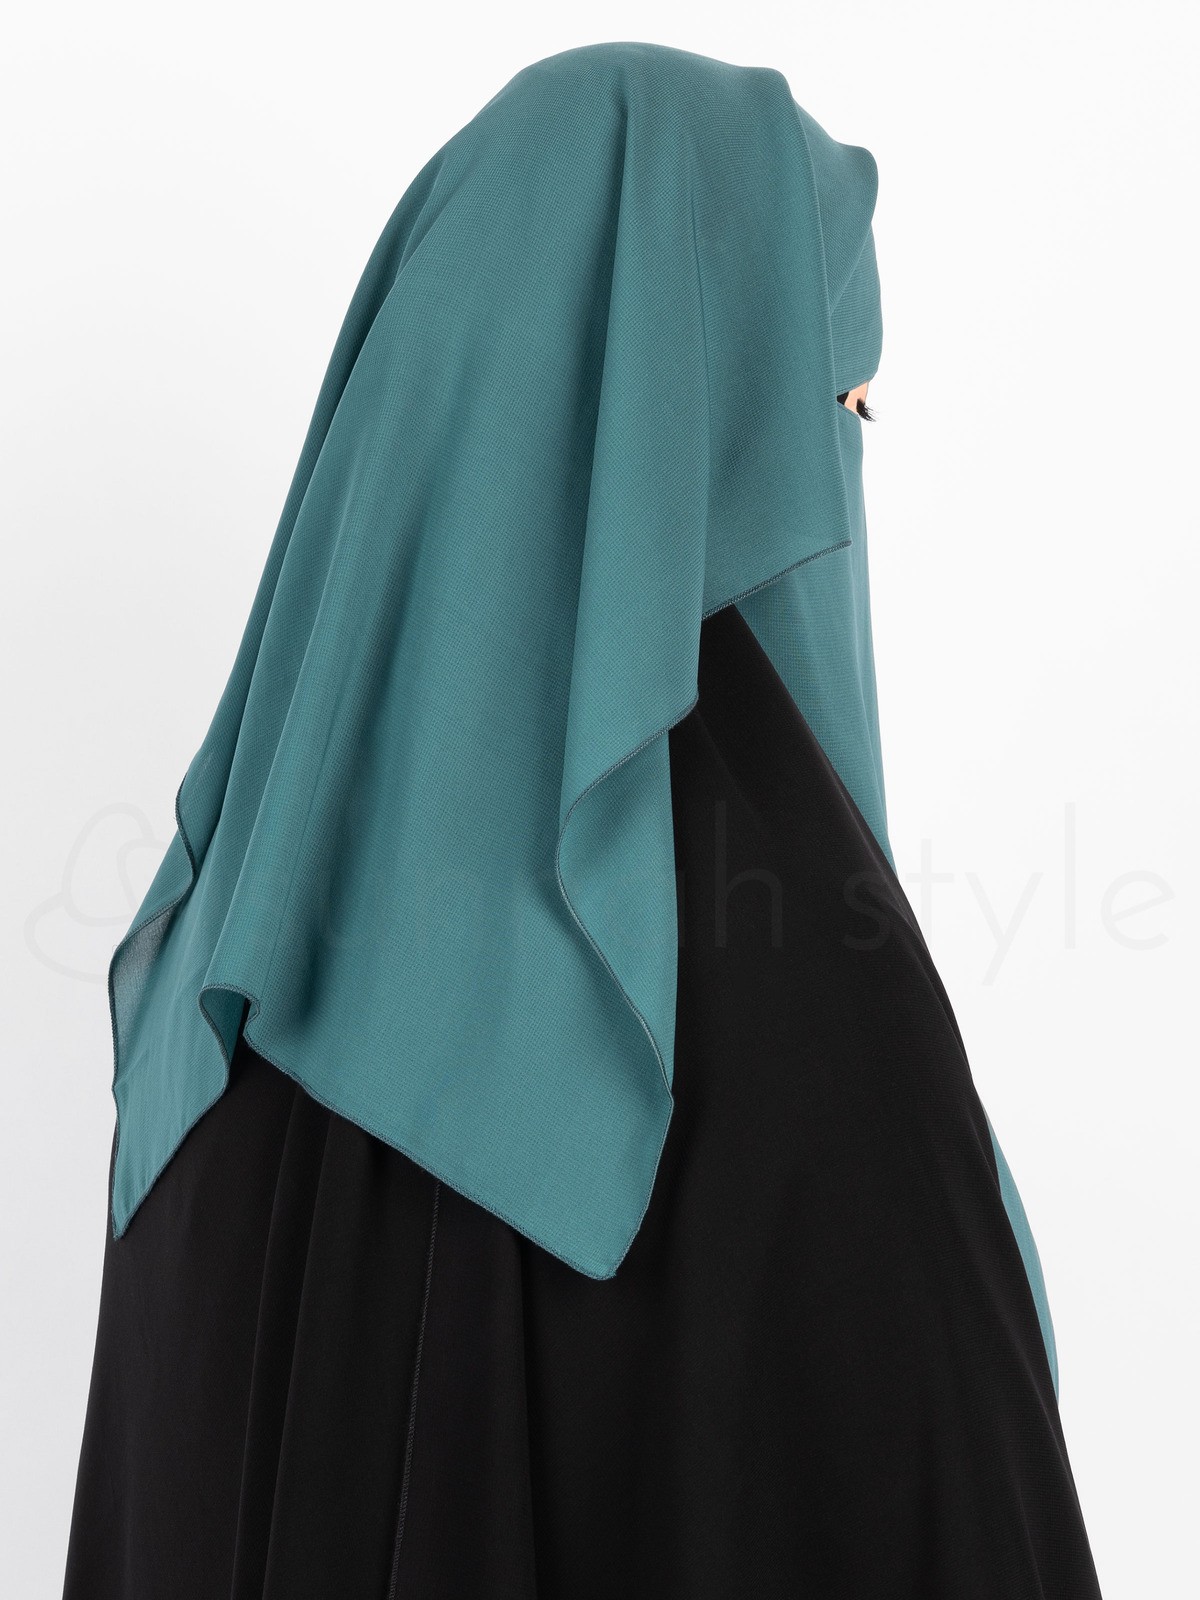 Sunnah Style - Two Layer Niqab (Teal)